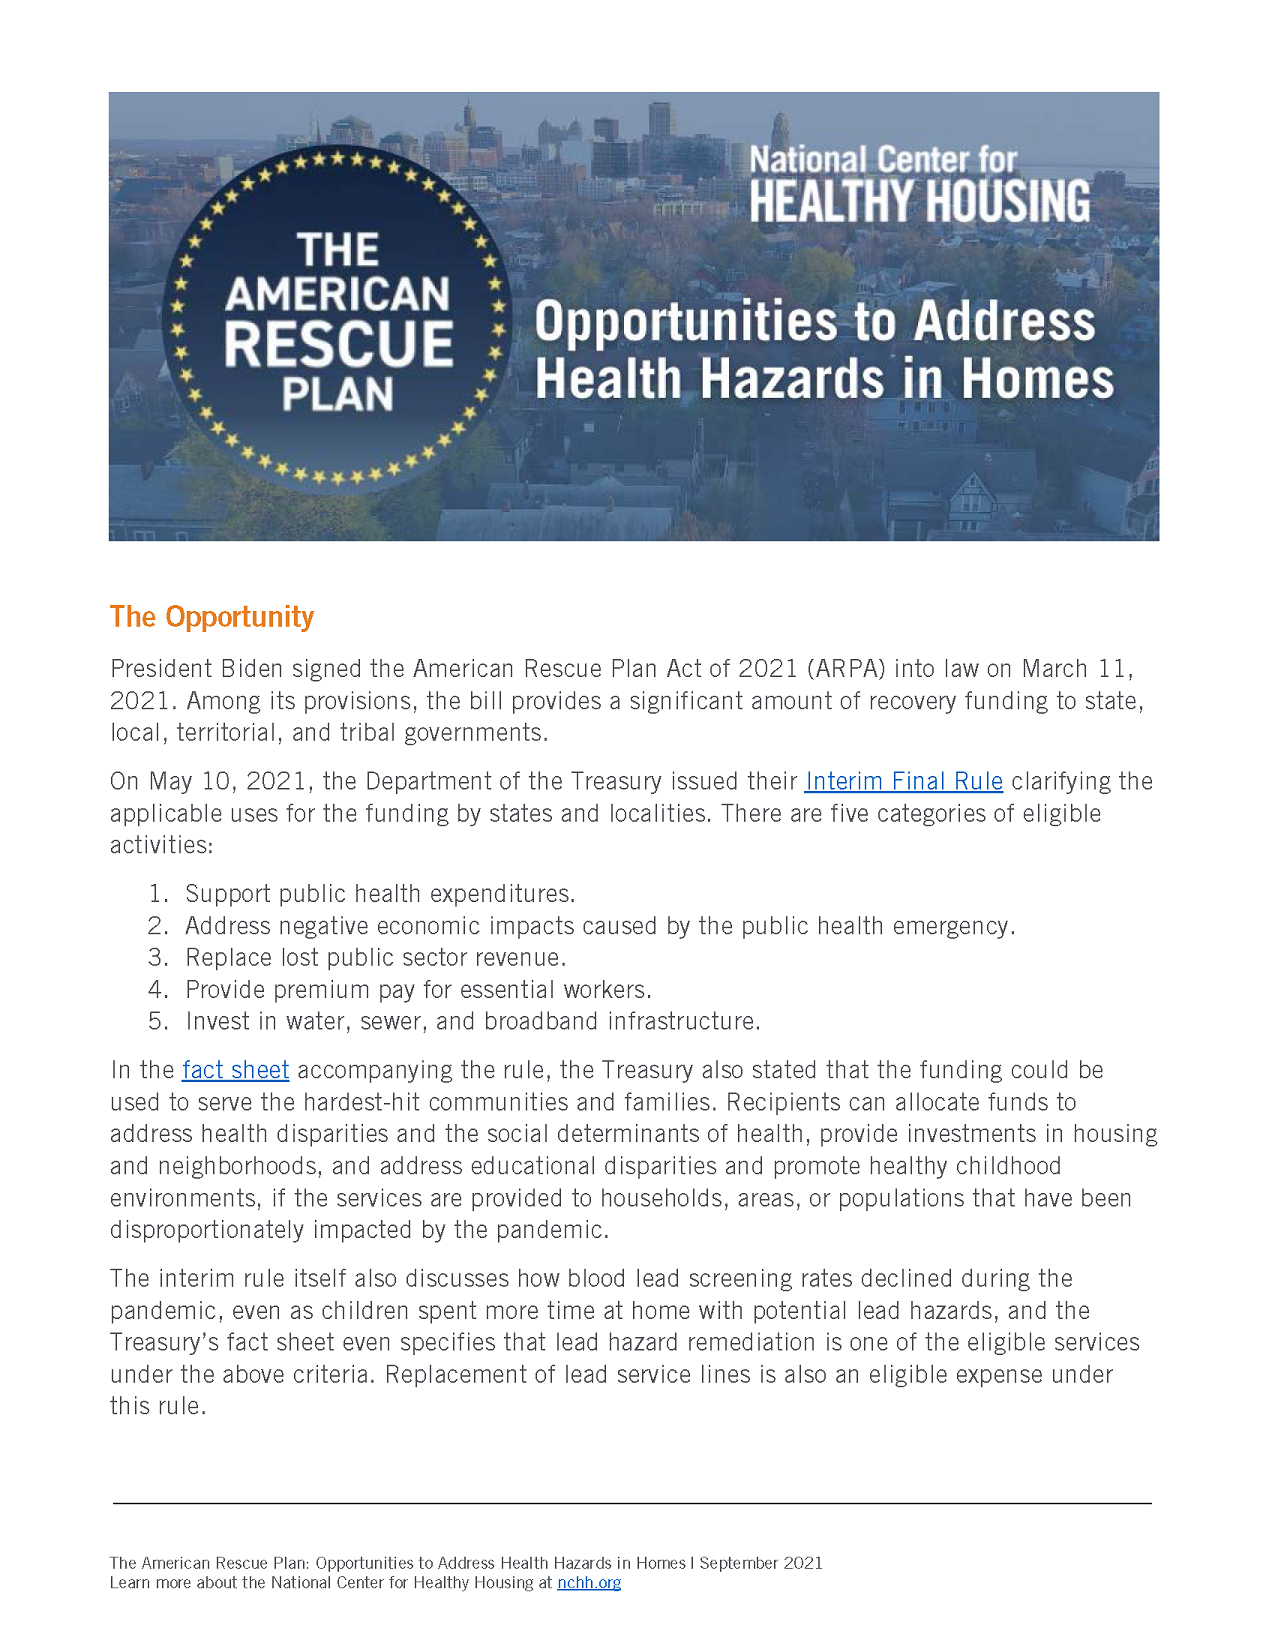 The American Rescue Plan: Opportunities to Address Health Hazards in Homes